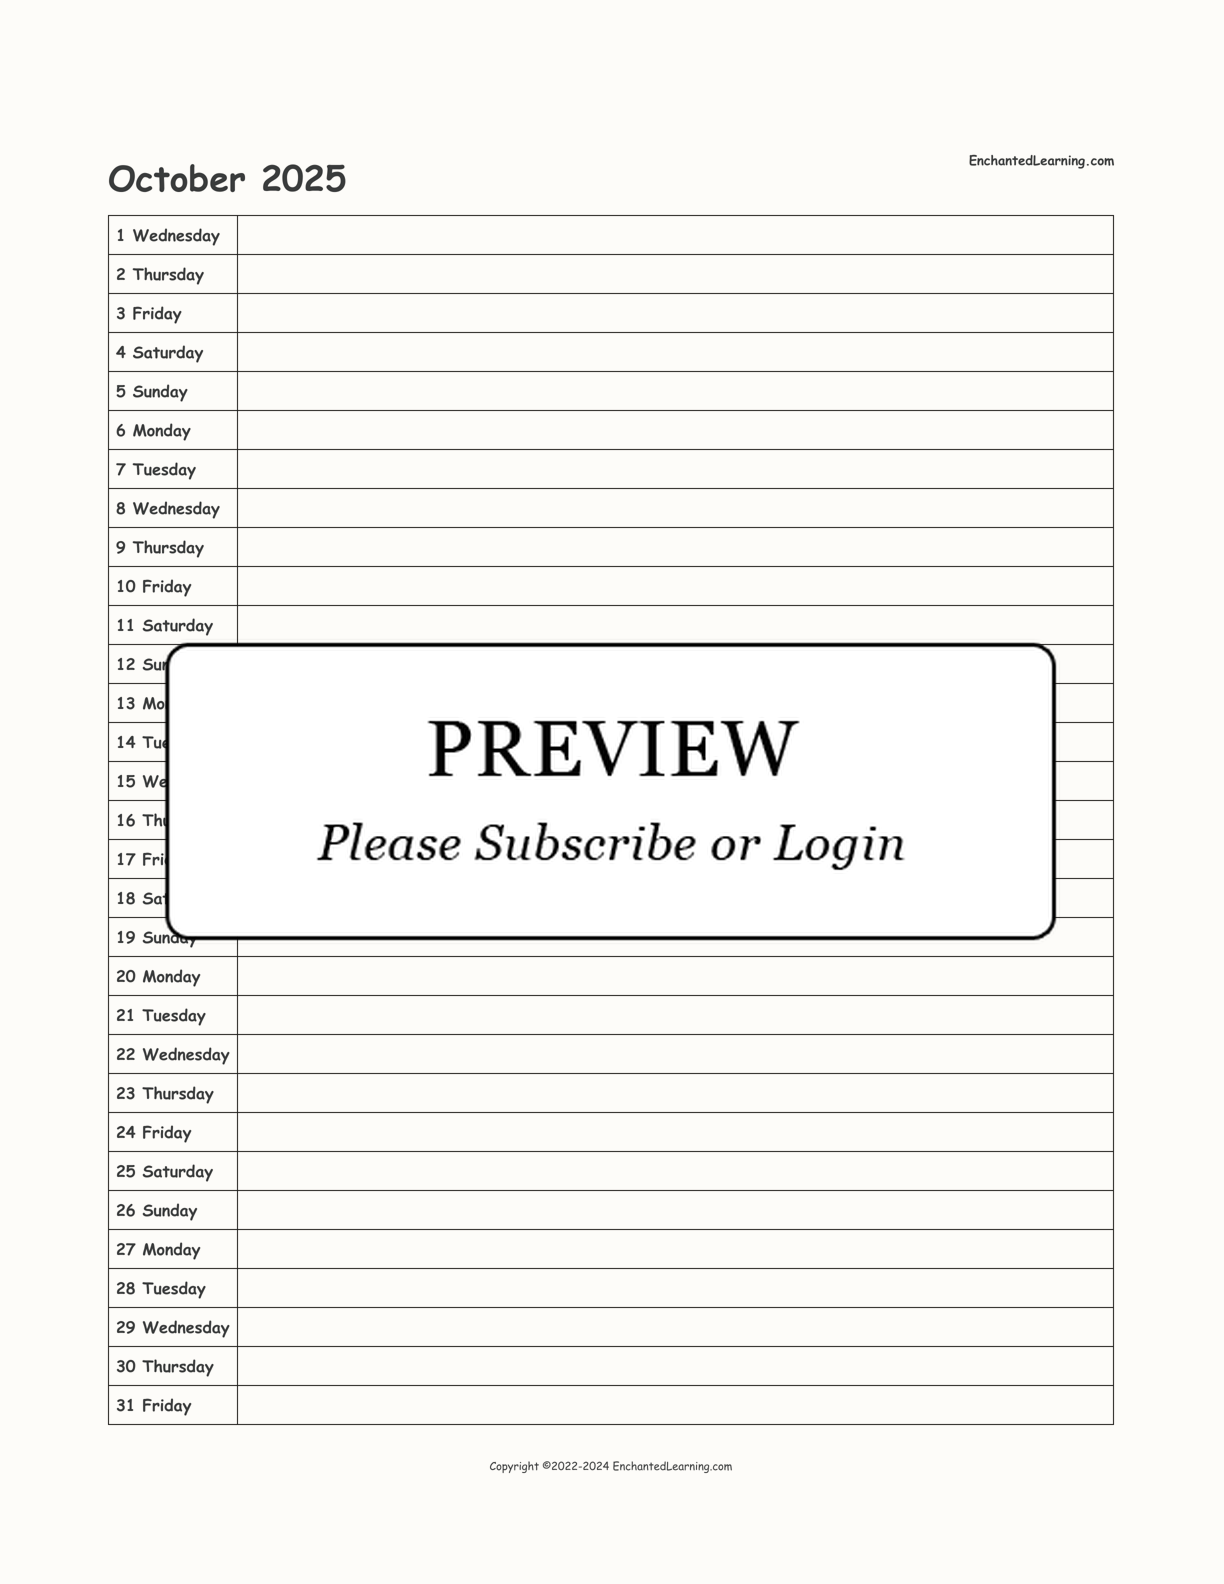 2025 Scheduling Calendar interactive printout page 10